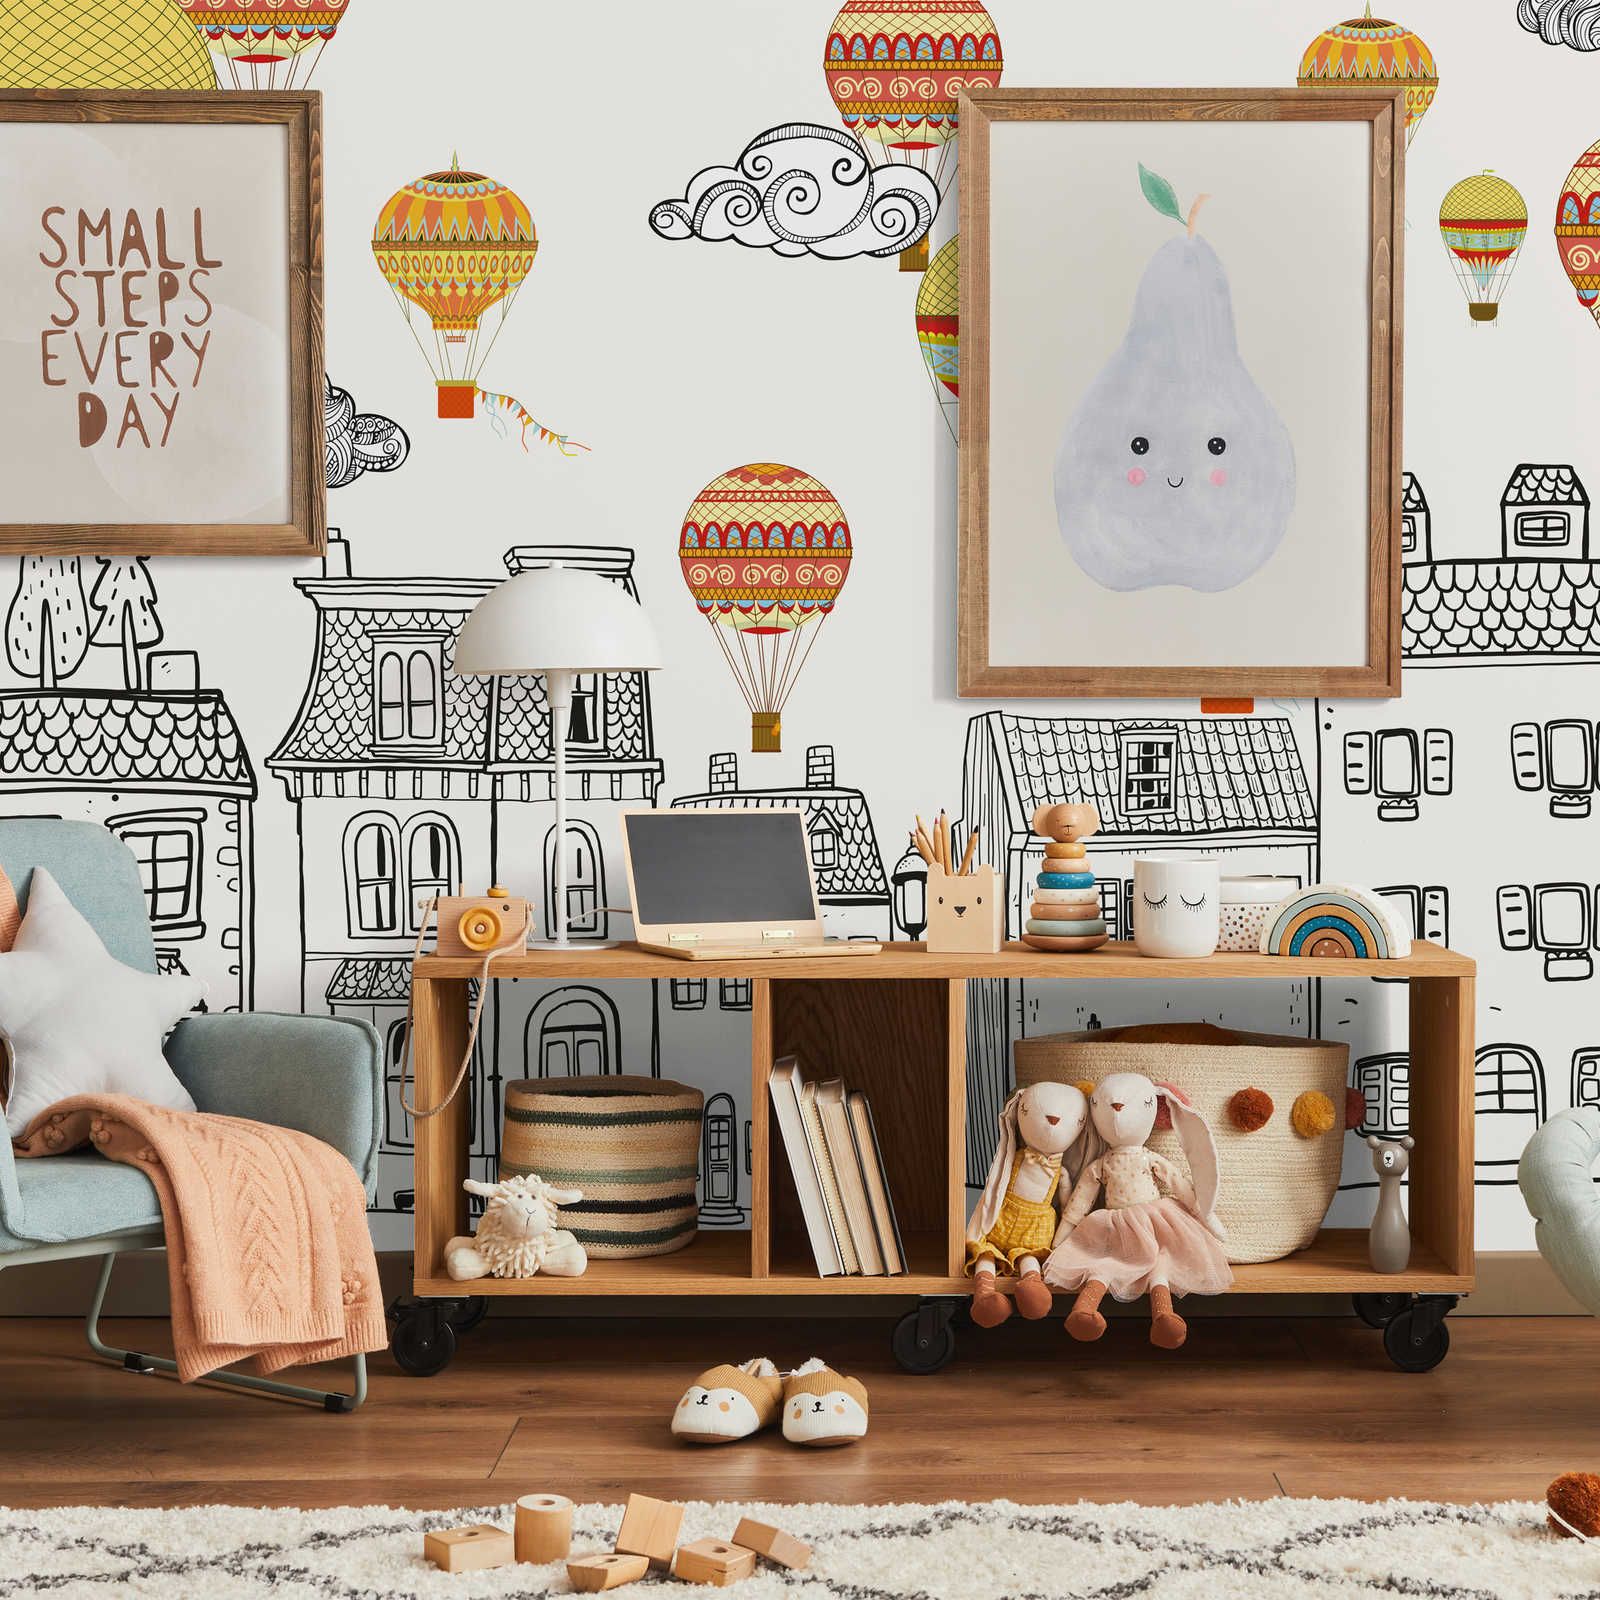 Small Town with Hot Air Balloons Wallpaper - Smooth & Pearlescent Non-woven
